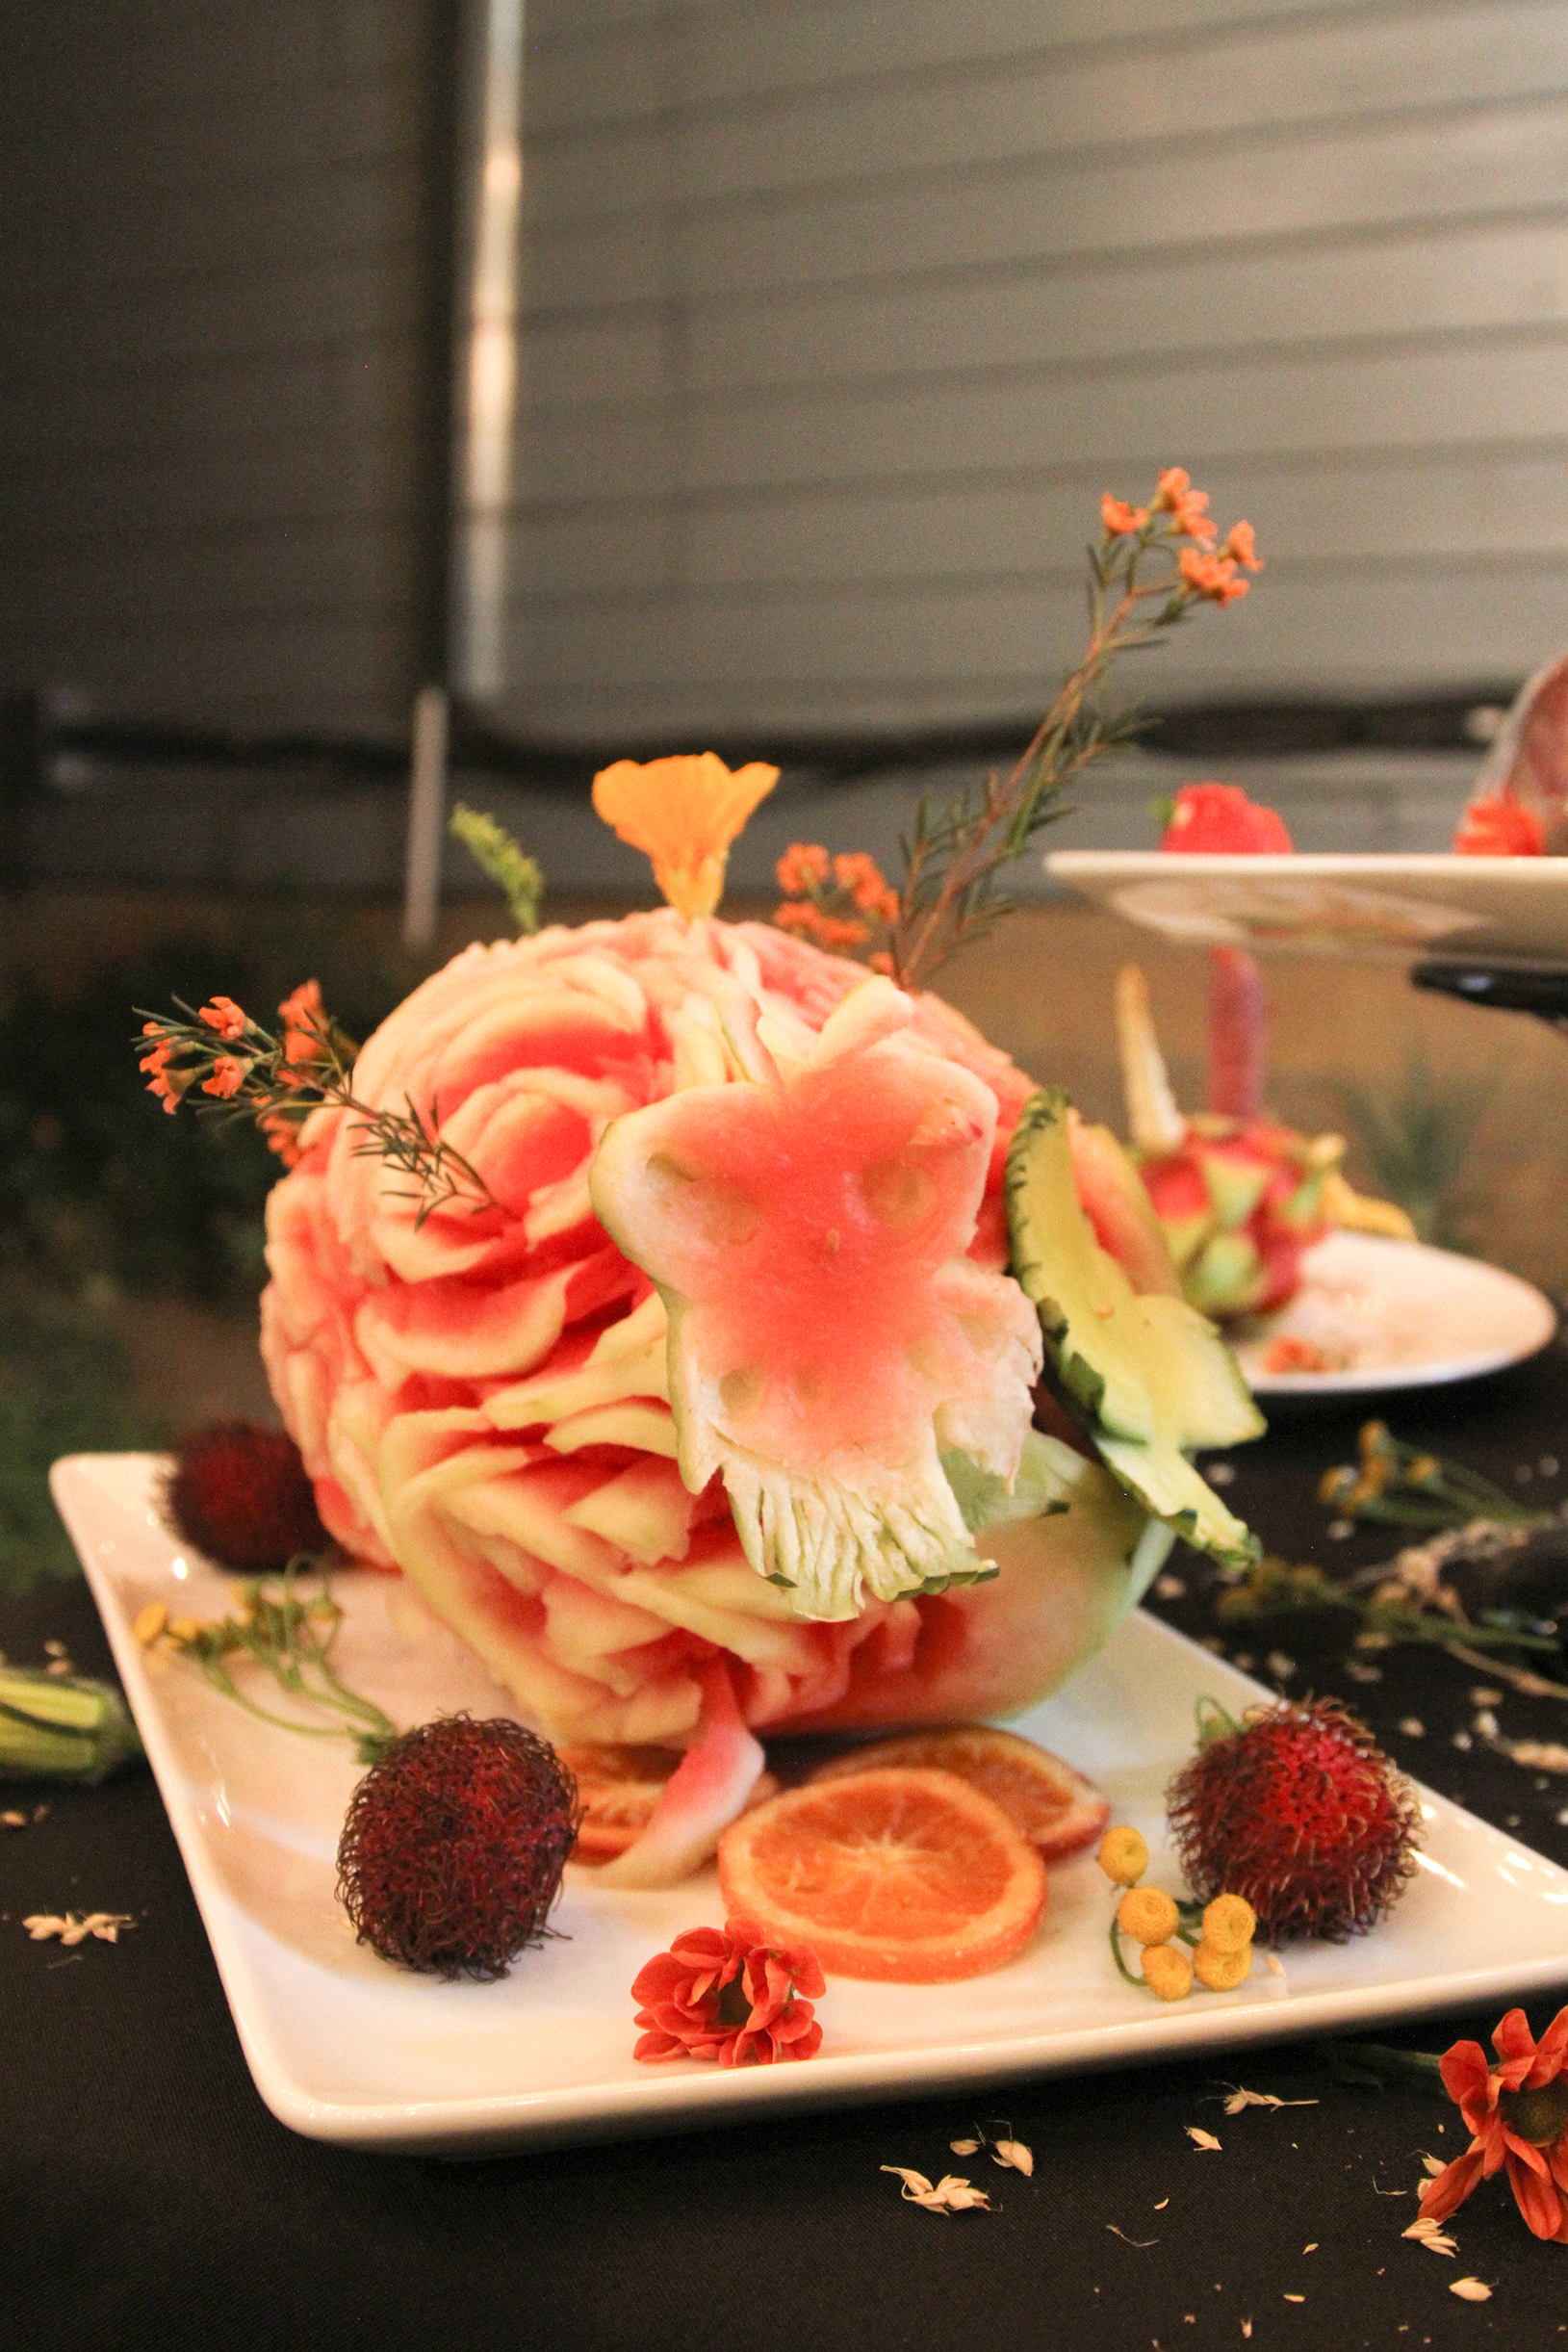 A watermellon carved with flower patterns surrounded by fruit on a white plate